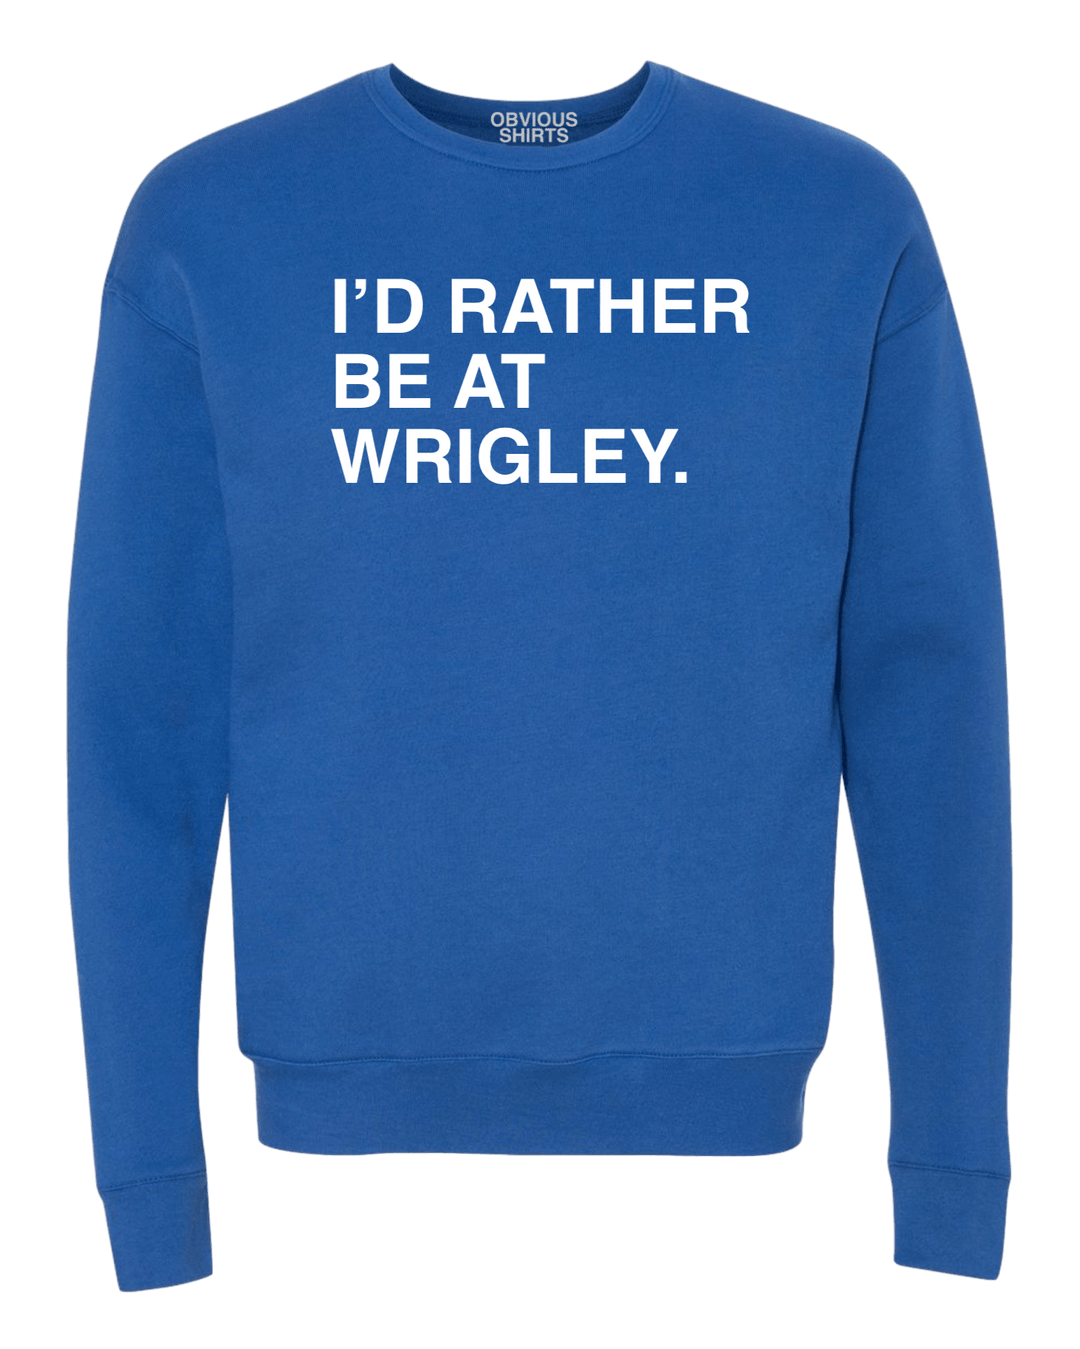 I'D RATHER BE AT WRIGLEY (CREW SWEATSHIRT) - OBVIOUS SHIRTS